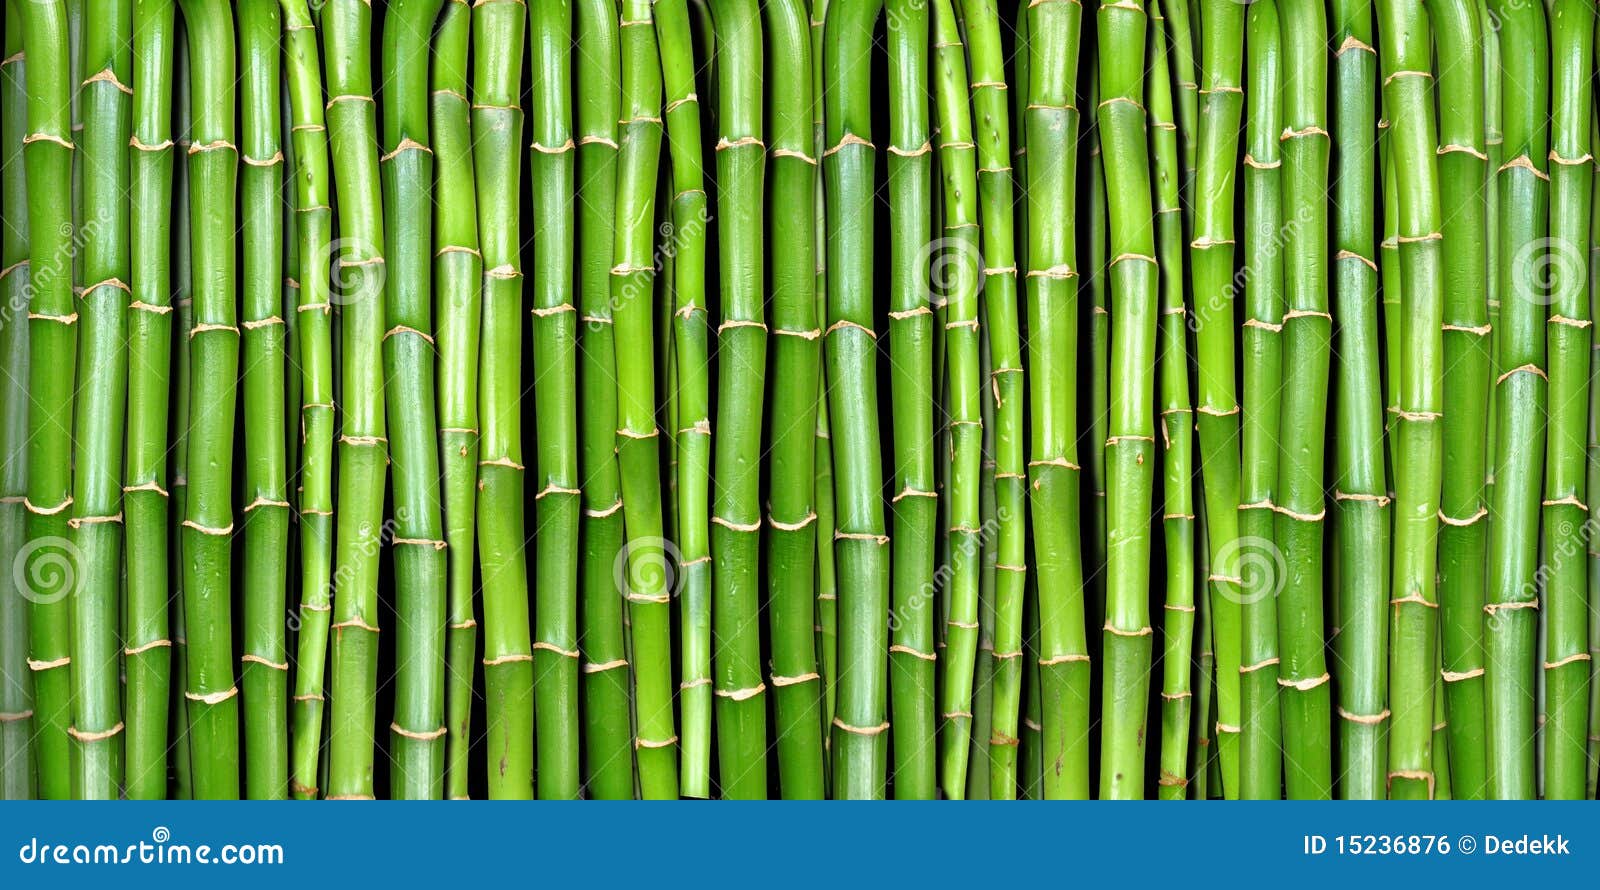 banner of bamboo